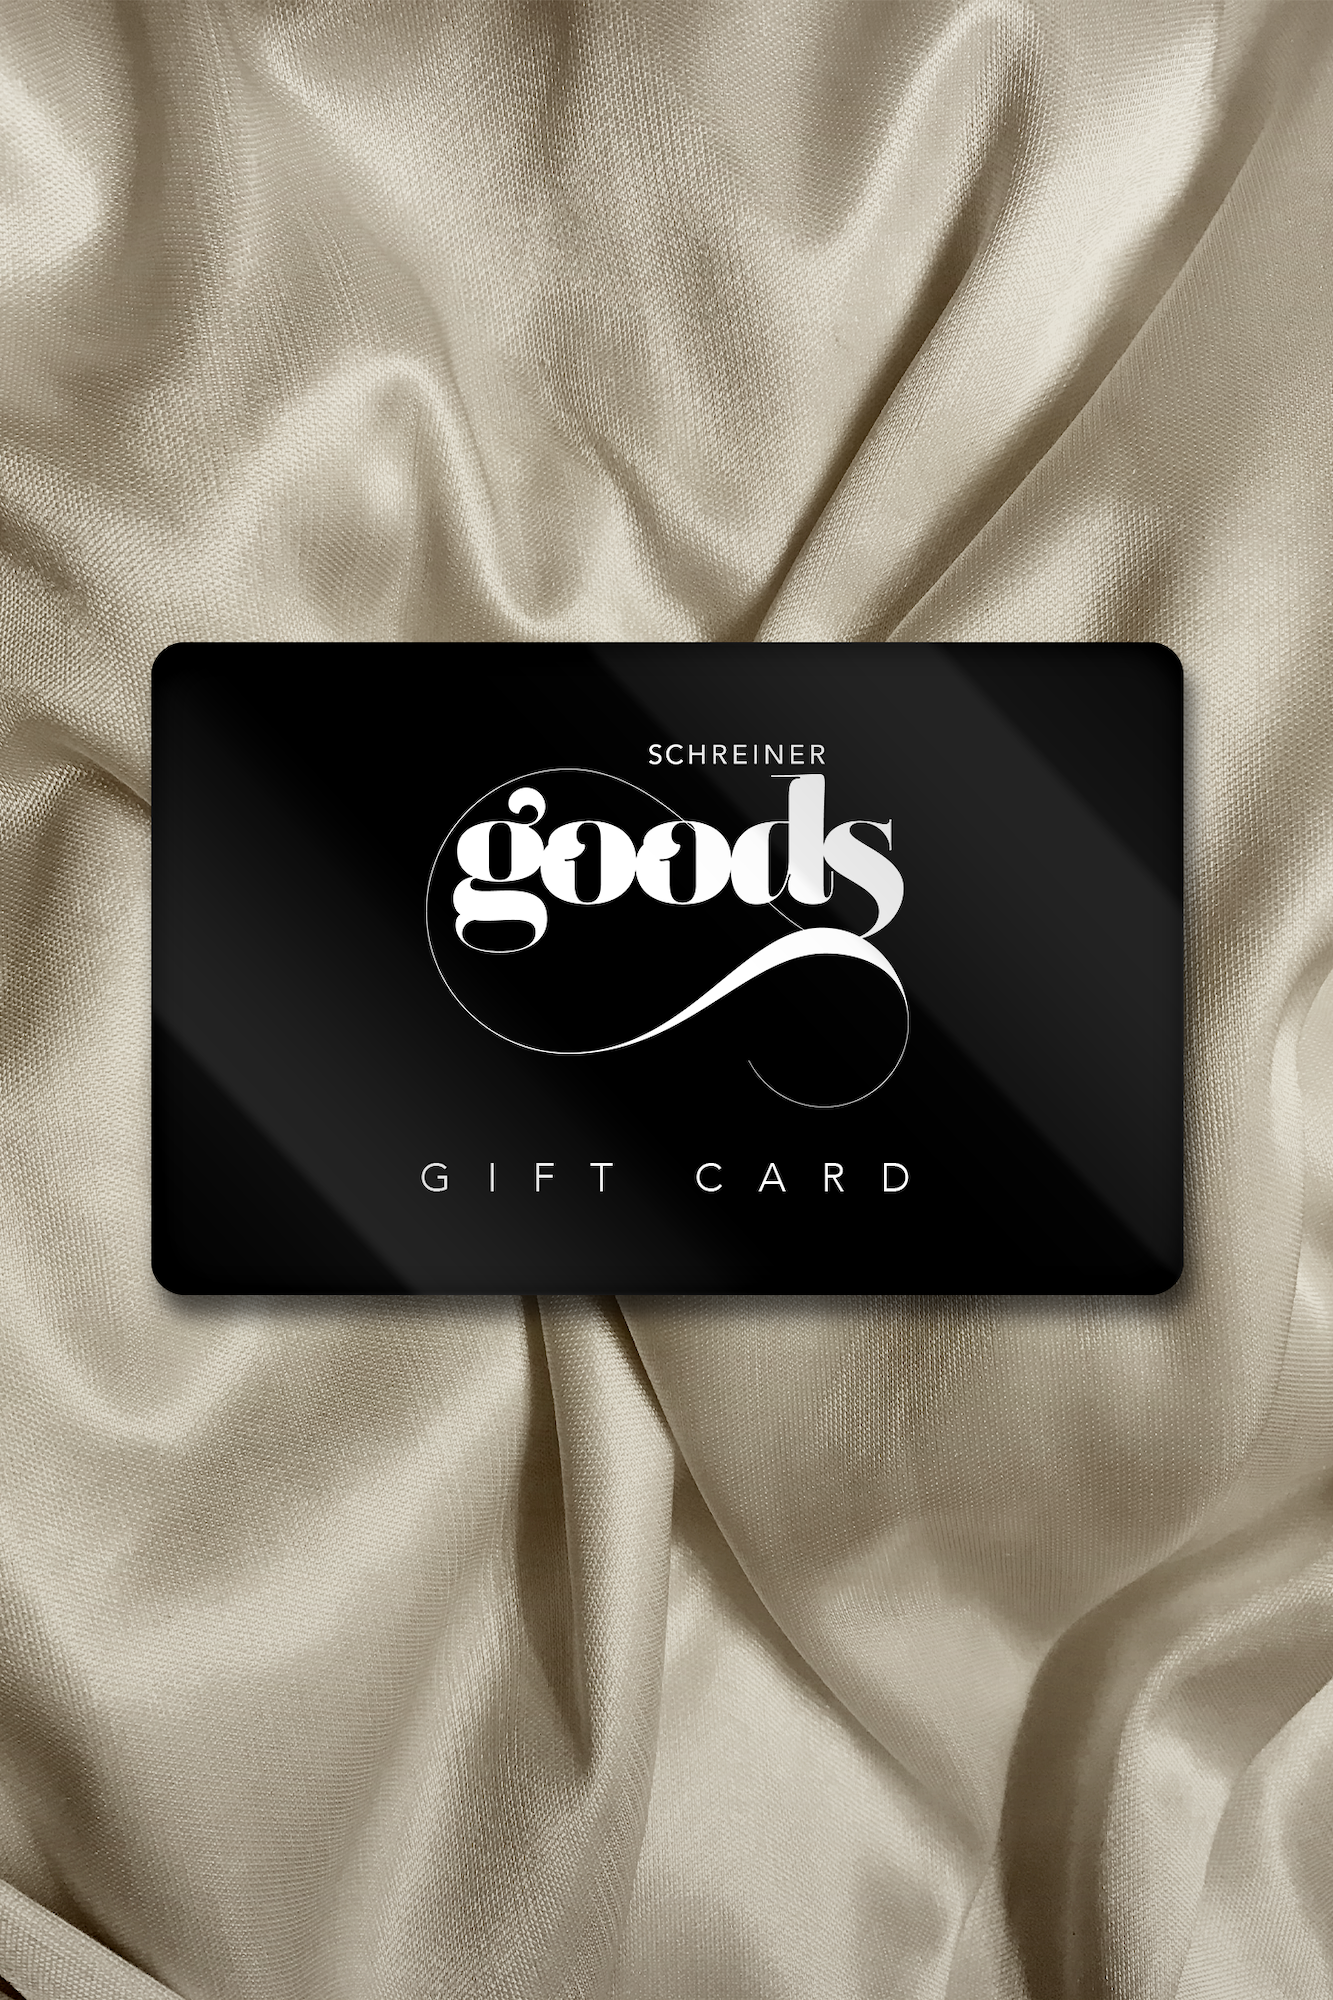 Gift cards purchased online can only be redeemed on our website. Cannot be used or combined with any promotions.